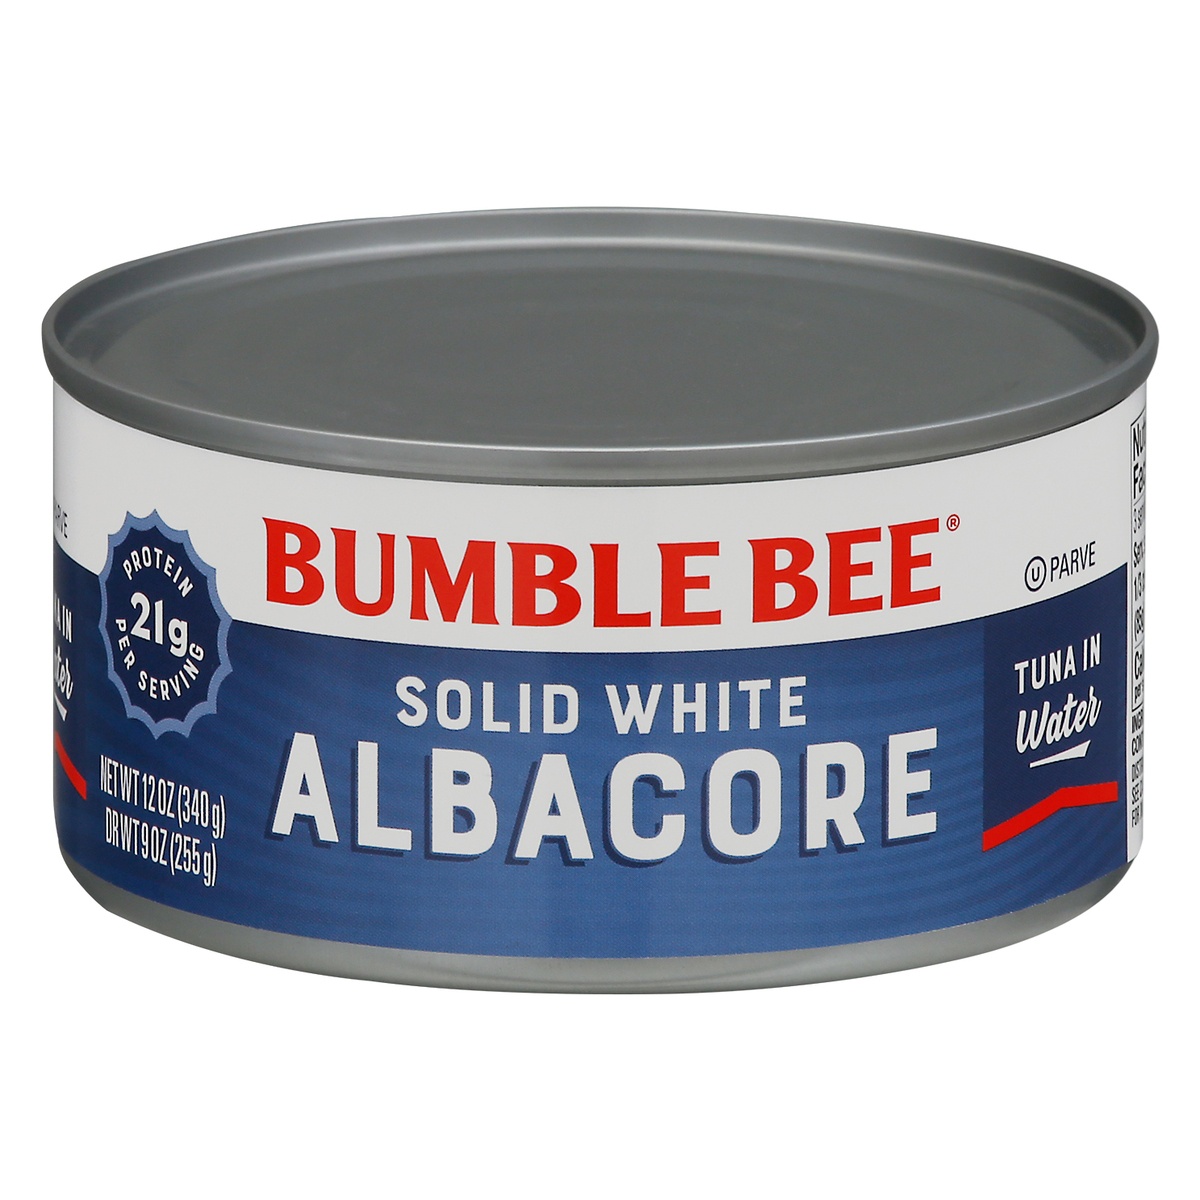 slide 1 of 8, Bumble Bee Solid White Albacore Tuna in Water 12 oz. Can, 